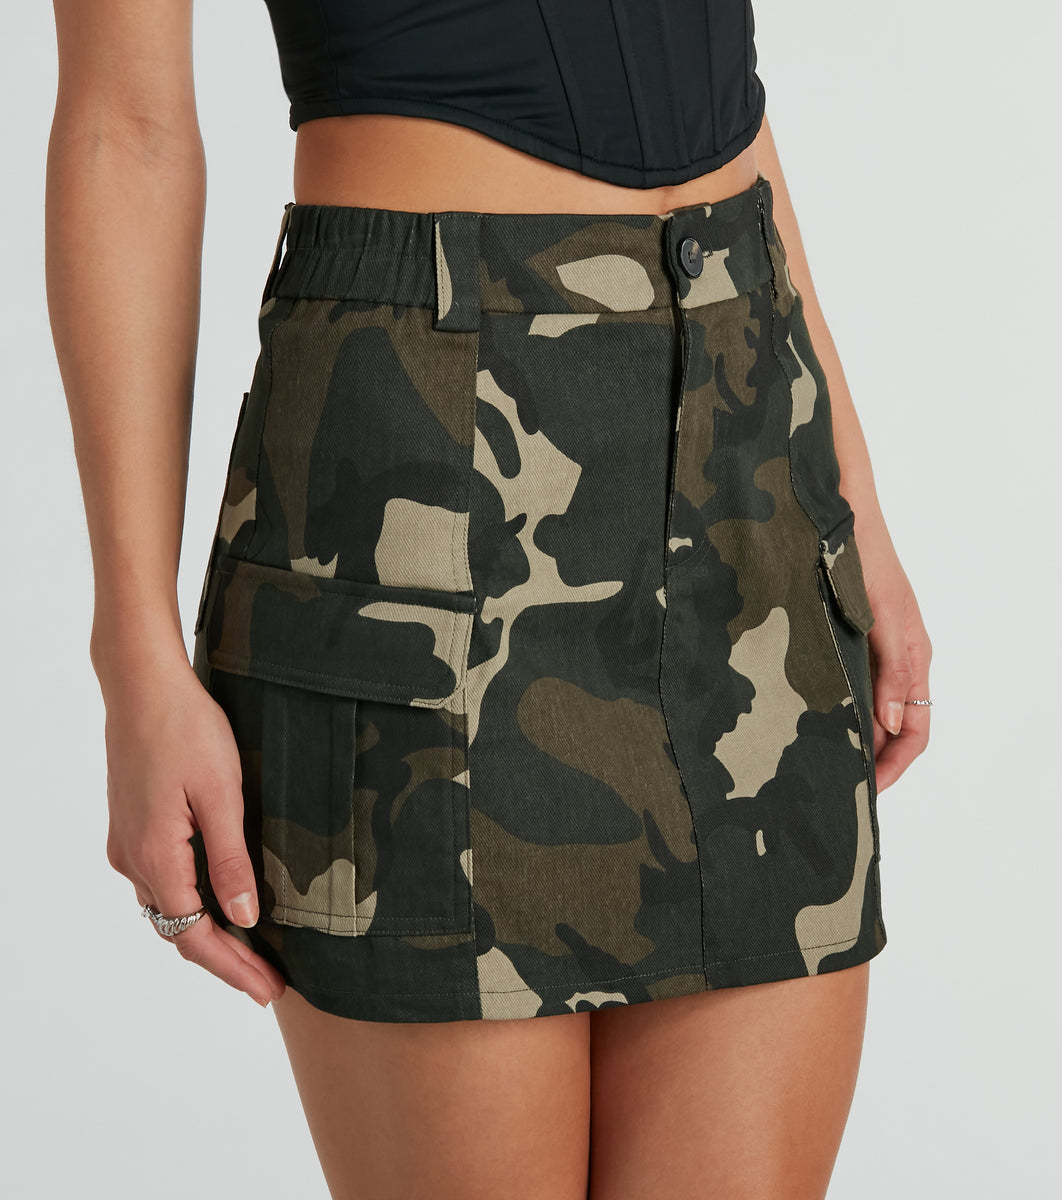 Most Wanted Cargo Camouflage Mini Skirt